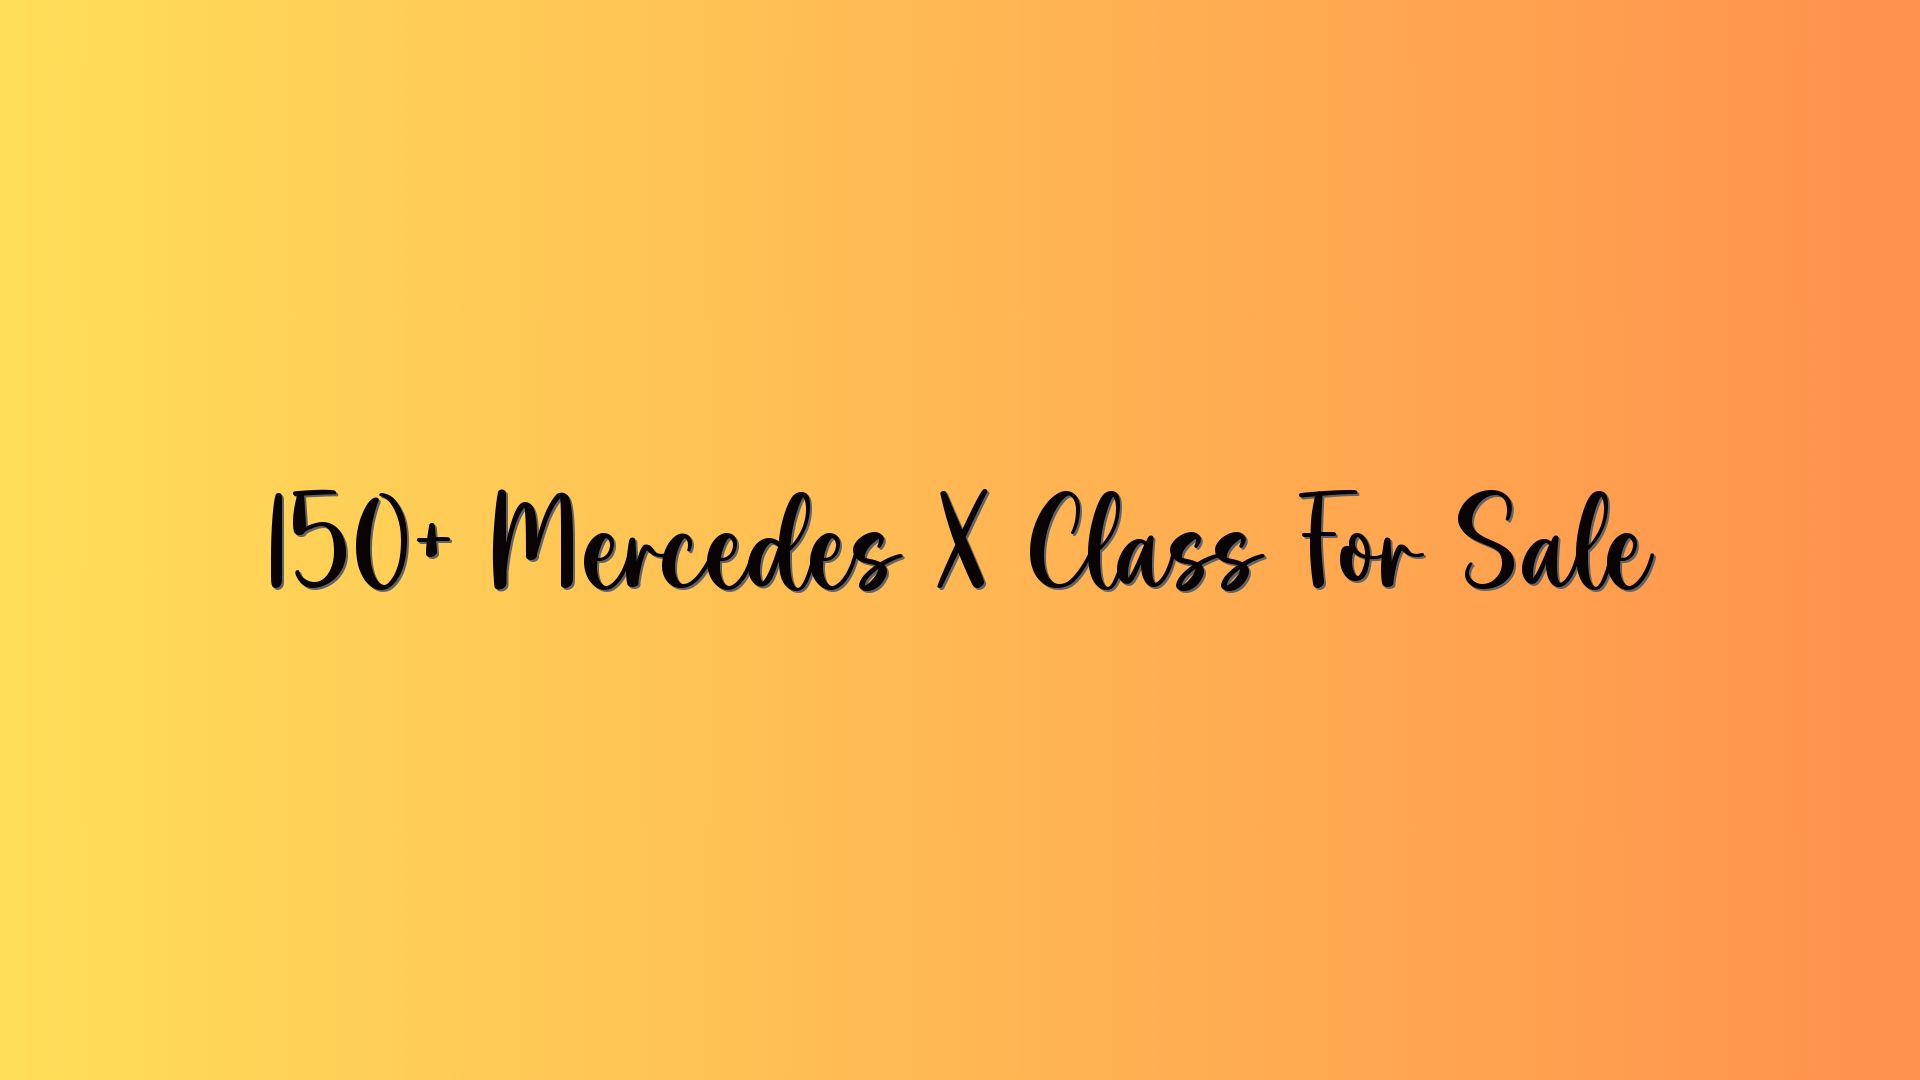 150+ Mercedes X Class For Sale